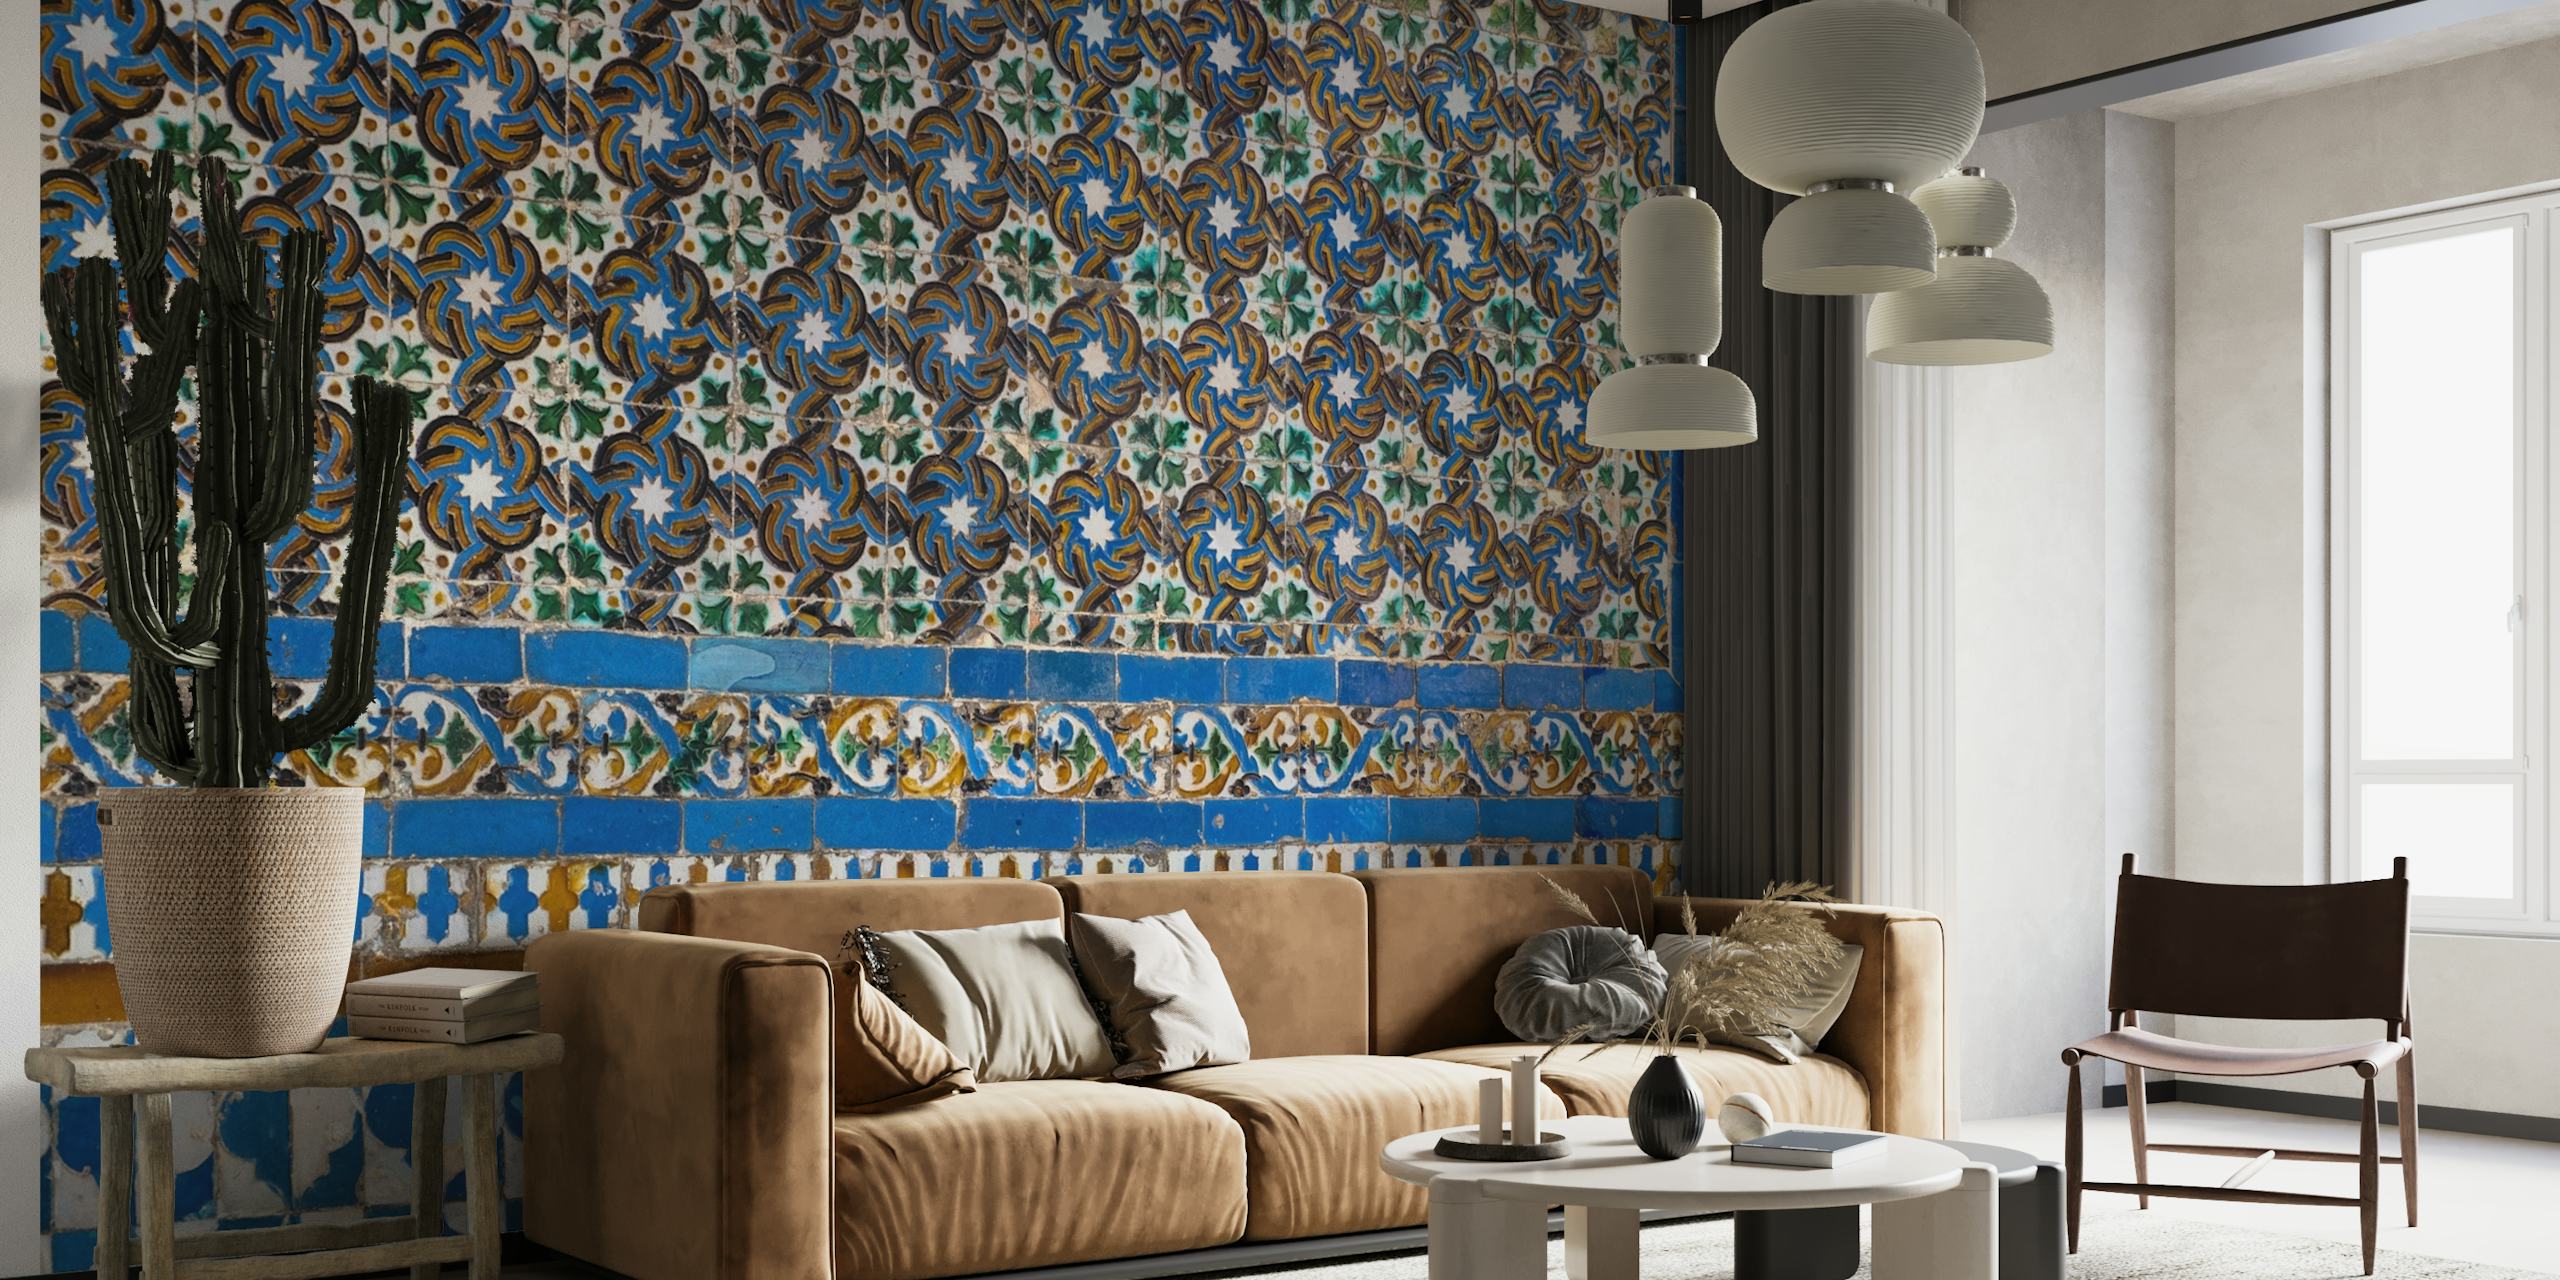 Wall mural depicting traditional Spanish tile patterns with intricate designs and a warm color scheme.